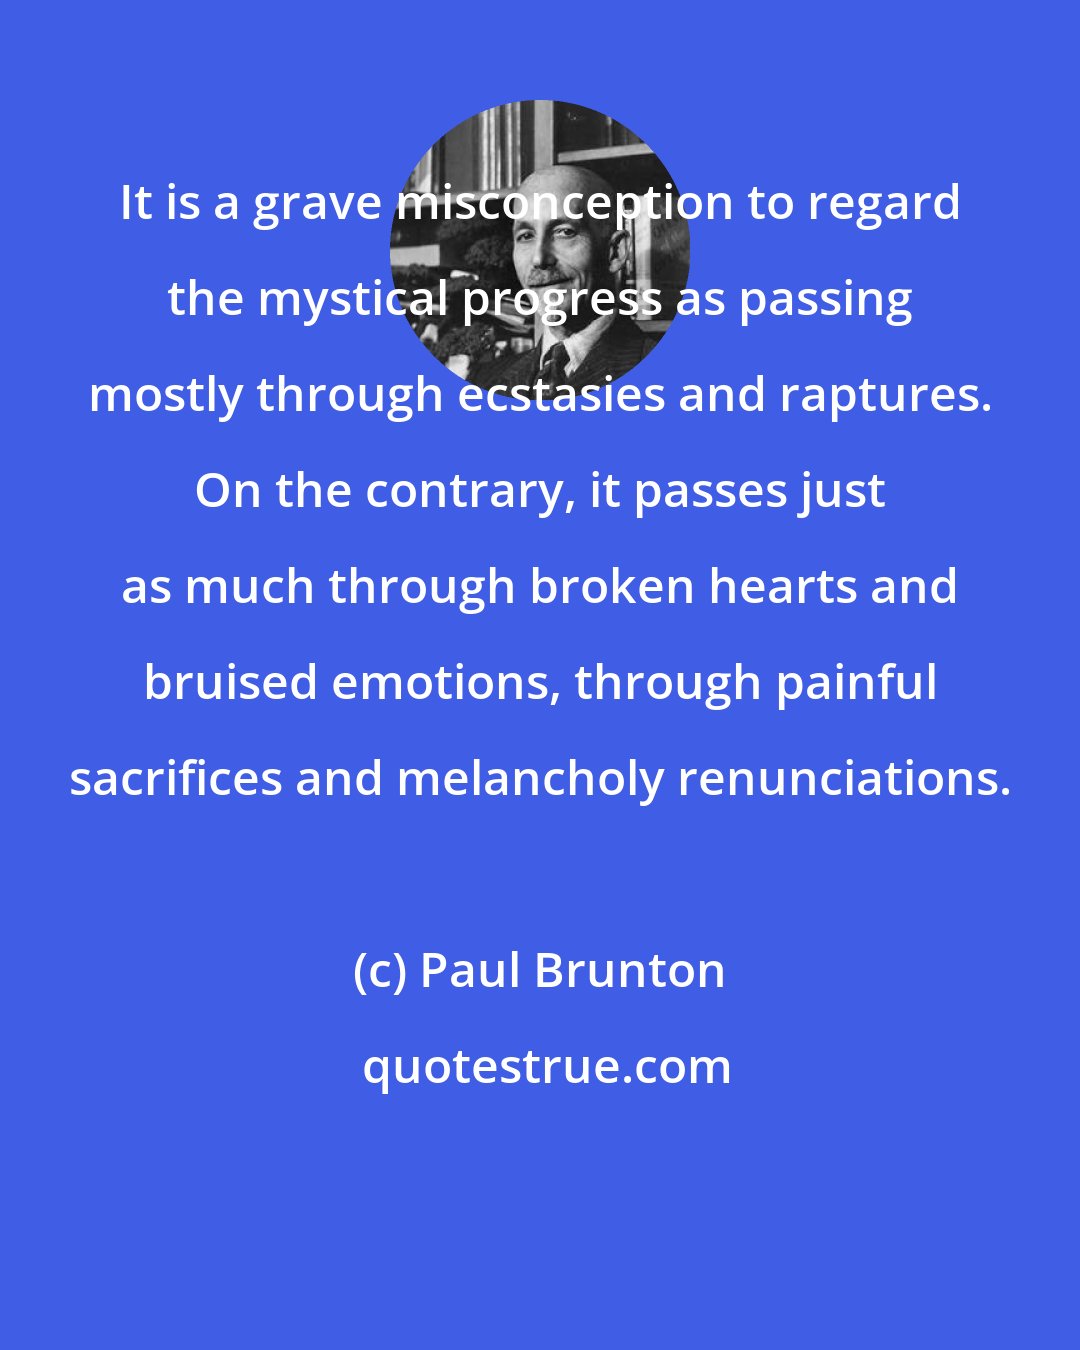 Paul Brunton: It is a grave misconception to regard the mystical progress as passing mostly through ecstasies and raptures. On the contrary, it passes just as much through broken hearts and bruised emotions, through painful sacrifices and melancholy renunciations.